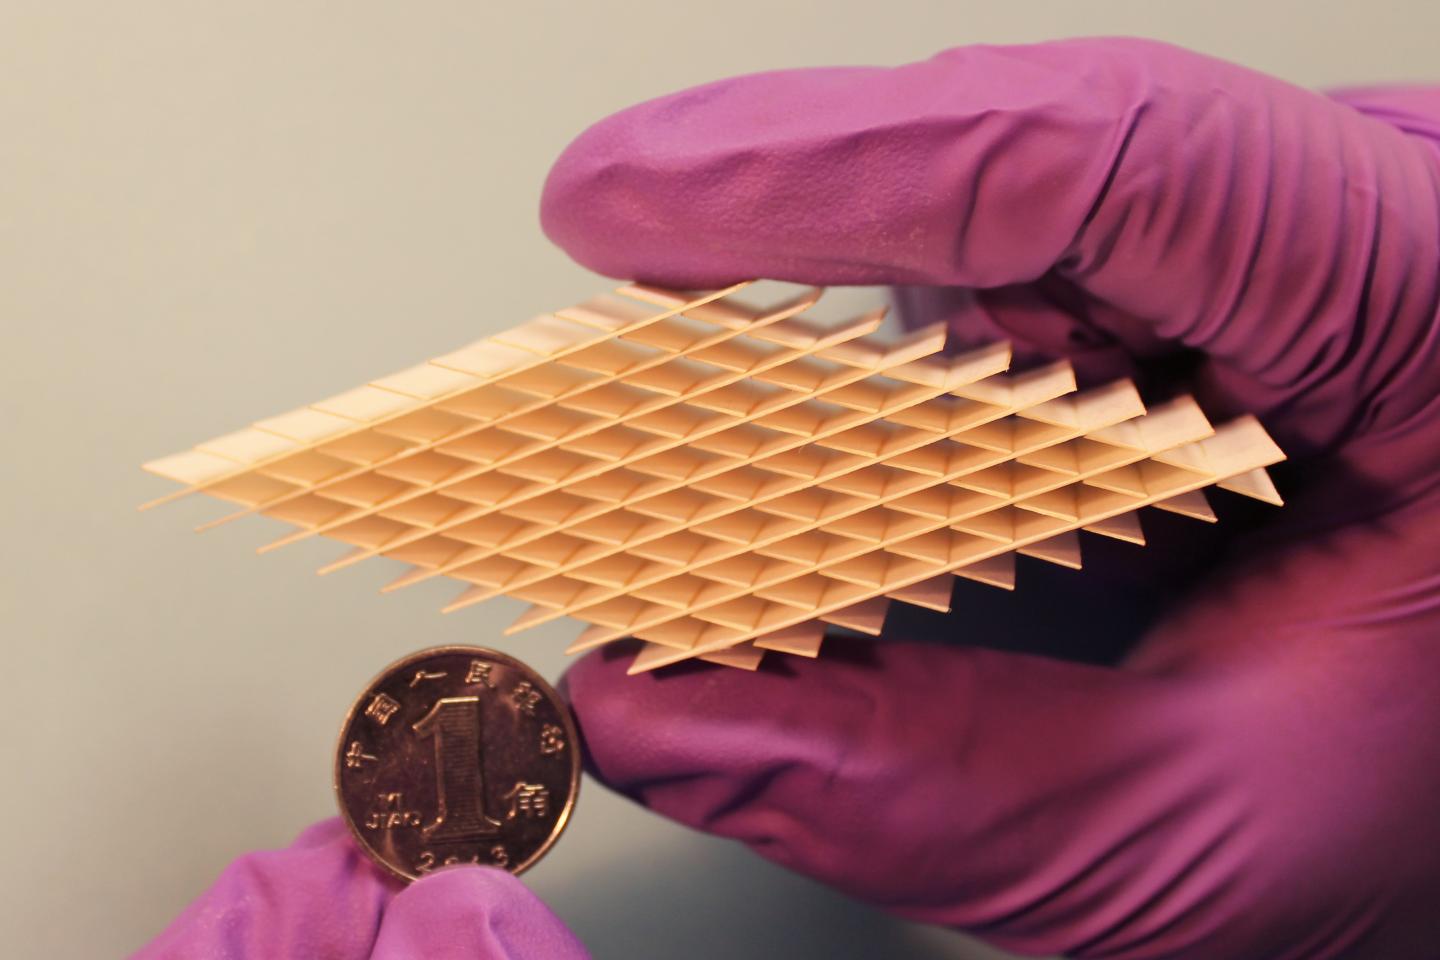 Art of Paper-Cutting Inspires Self-Charging Paper Device